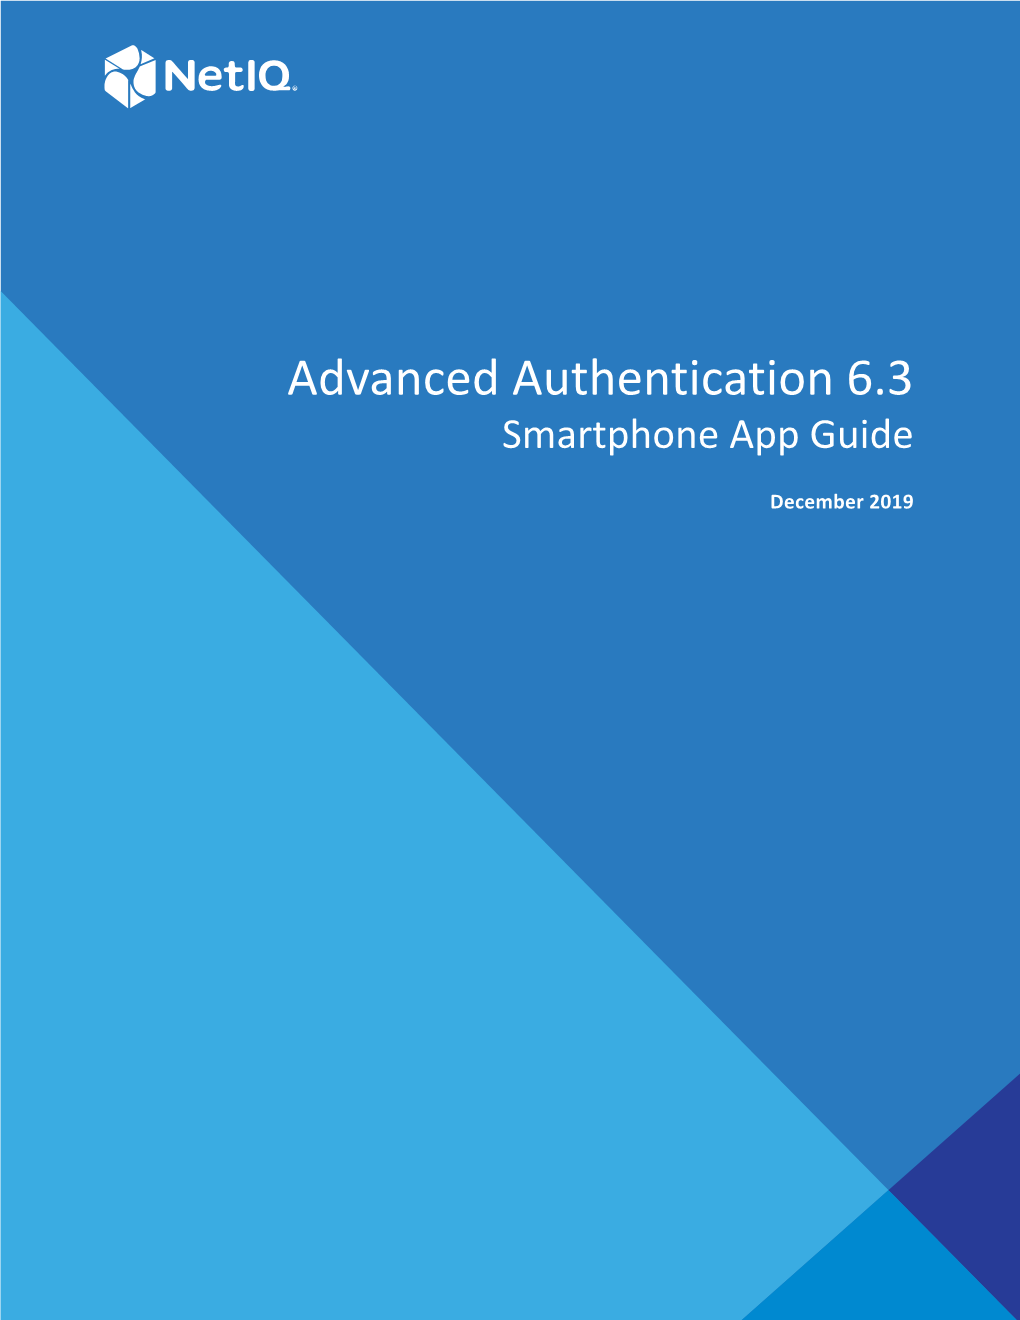 Advanced Authentication 6.3 Smartphone App Guide